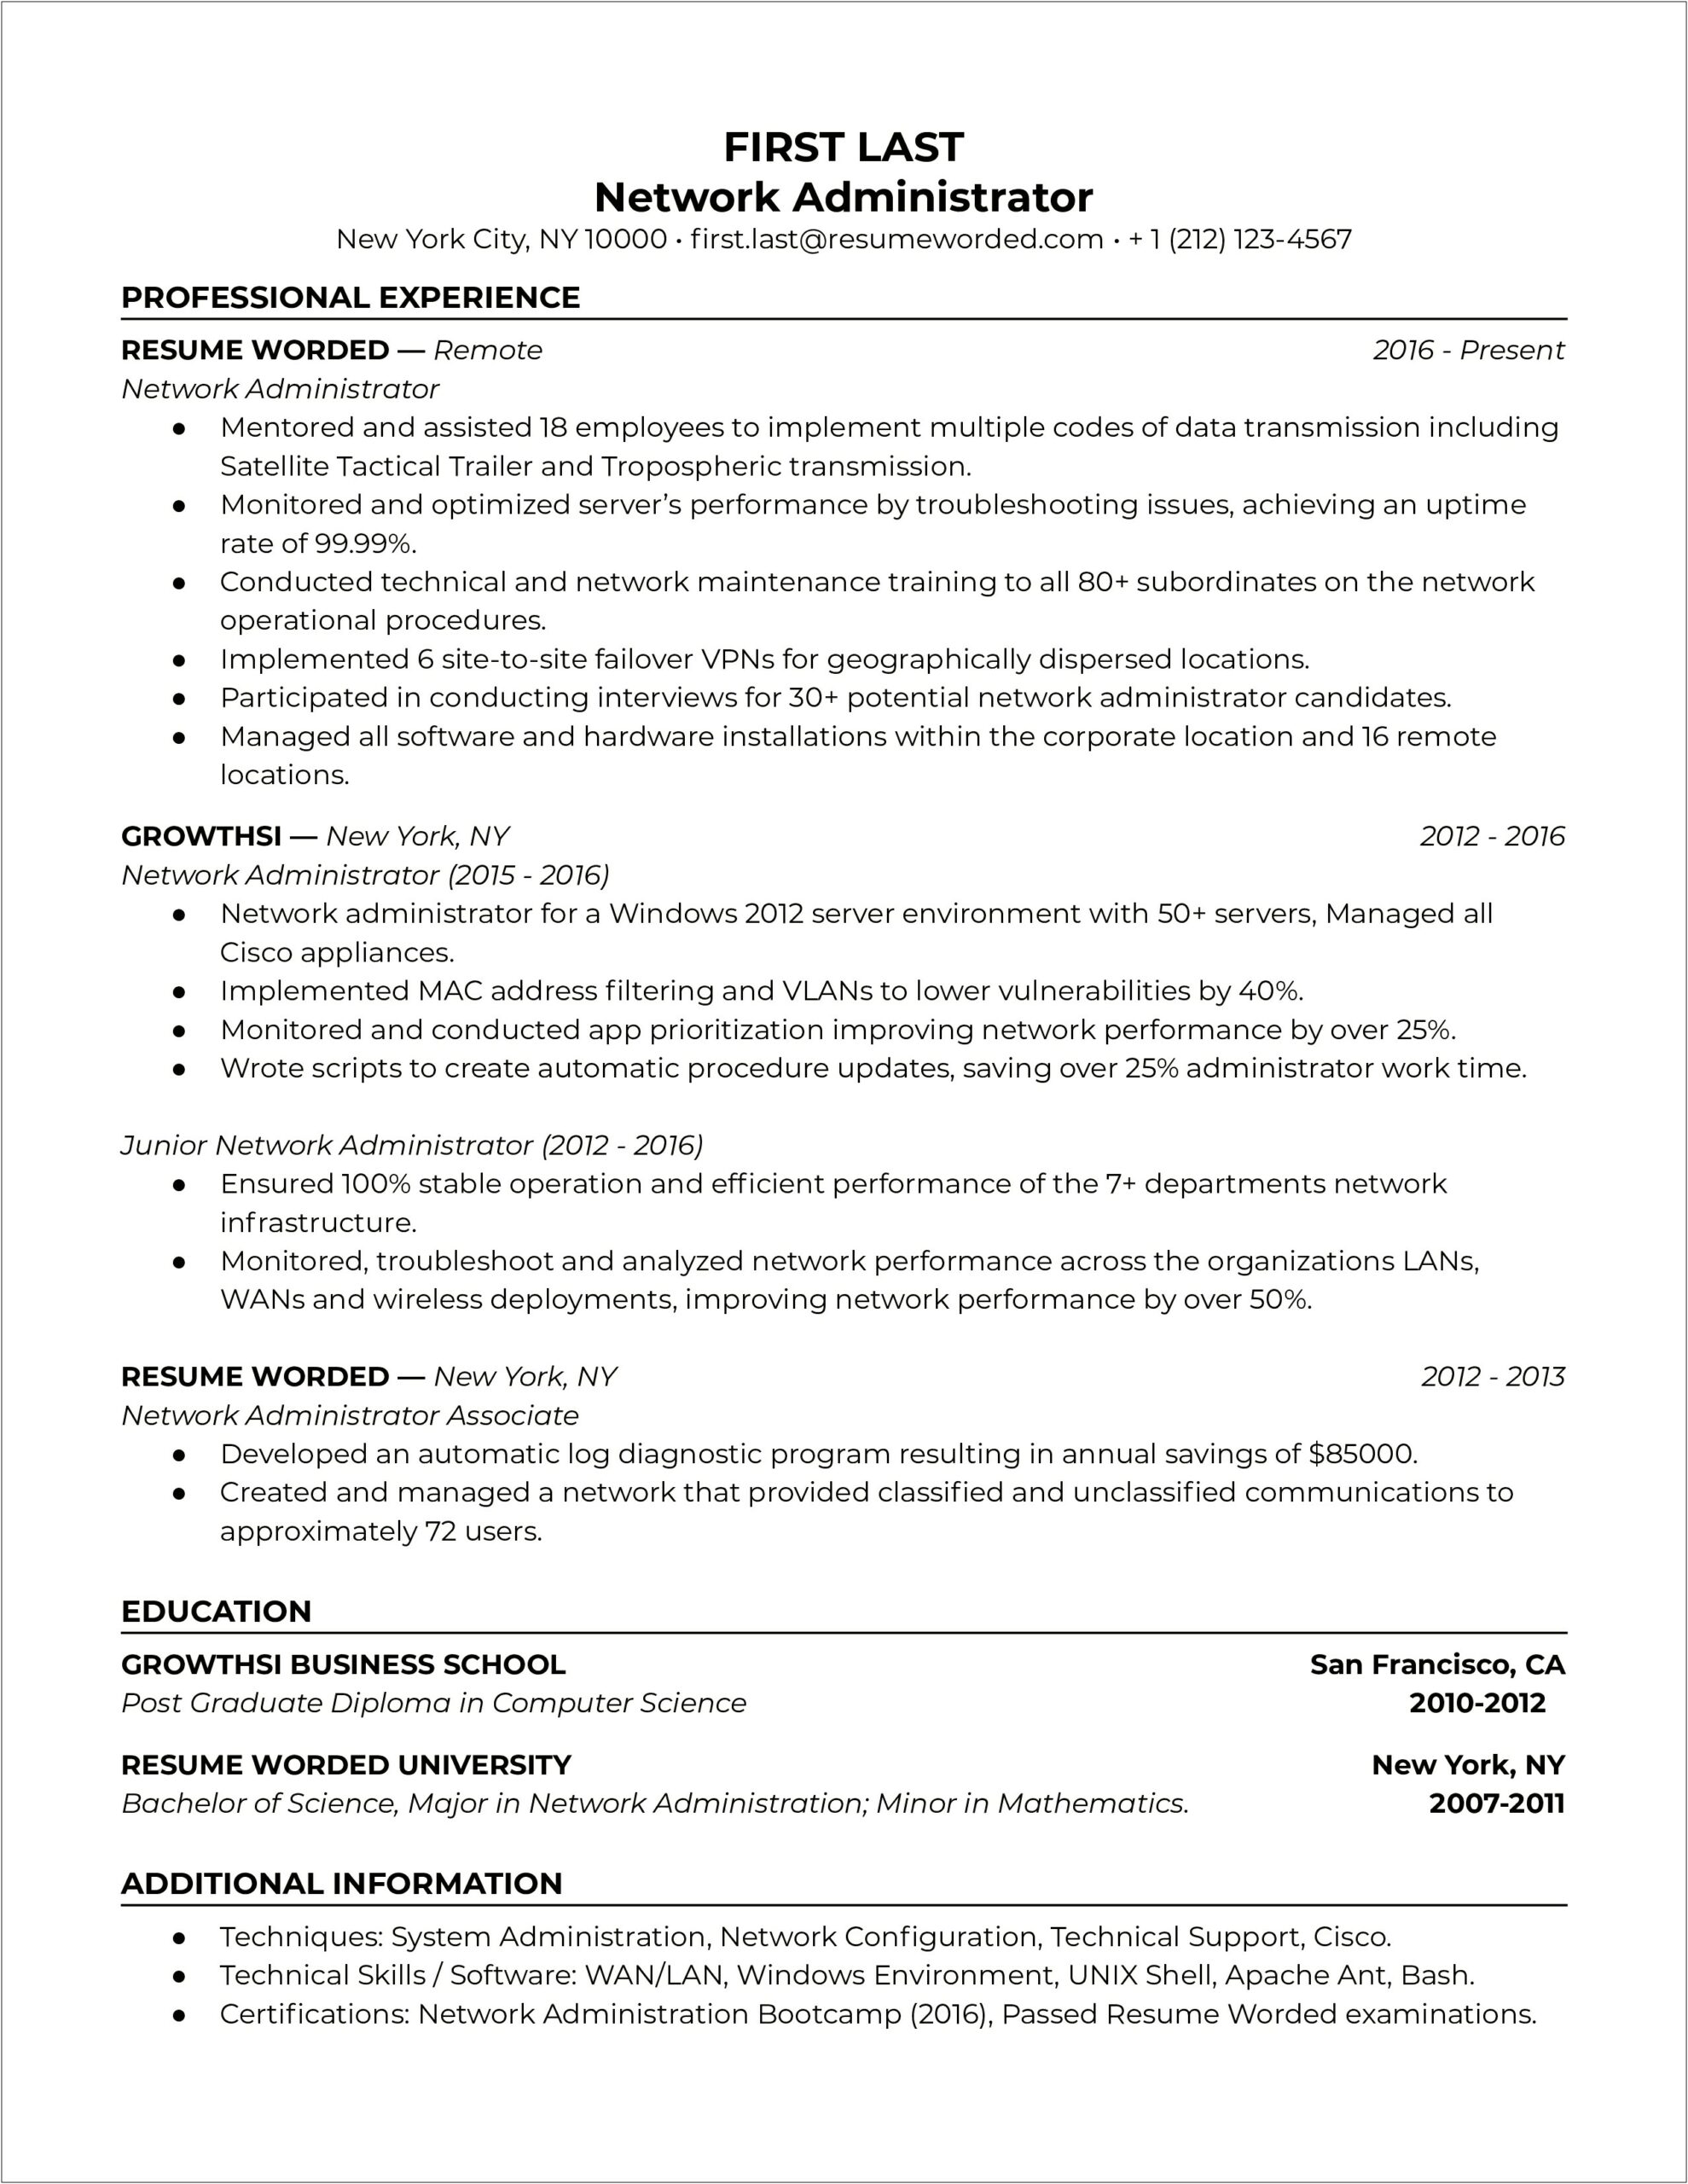 System Administrator Resume 4 Years Experience